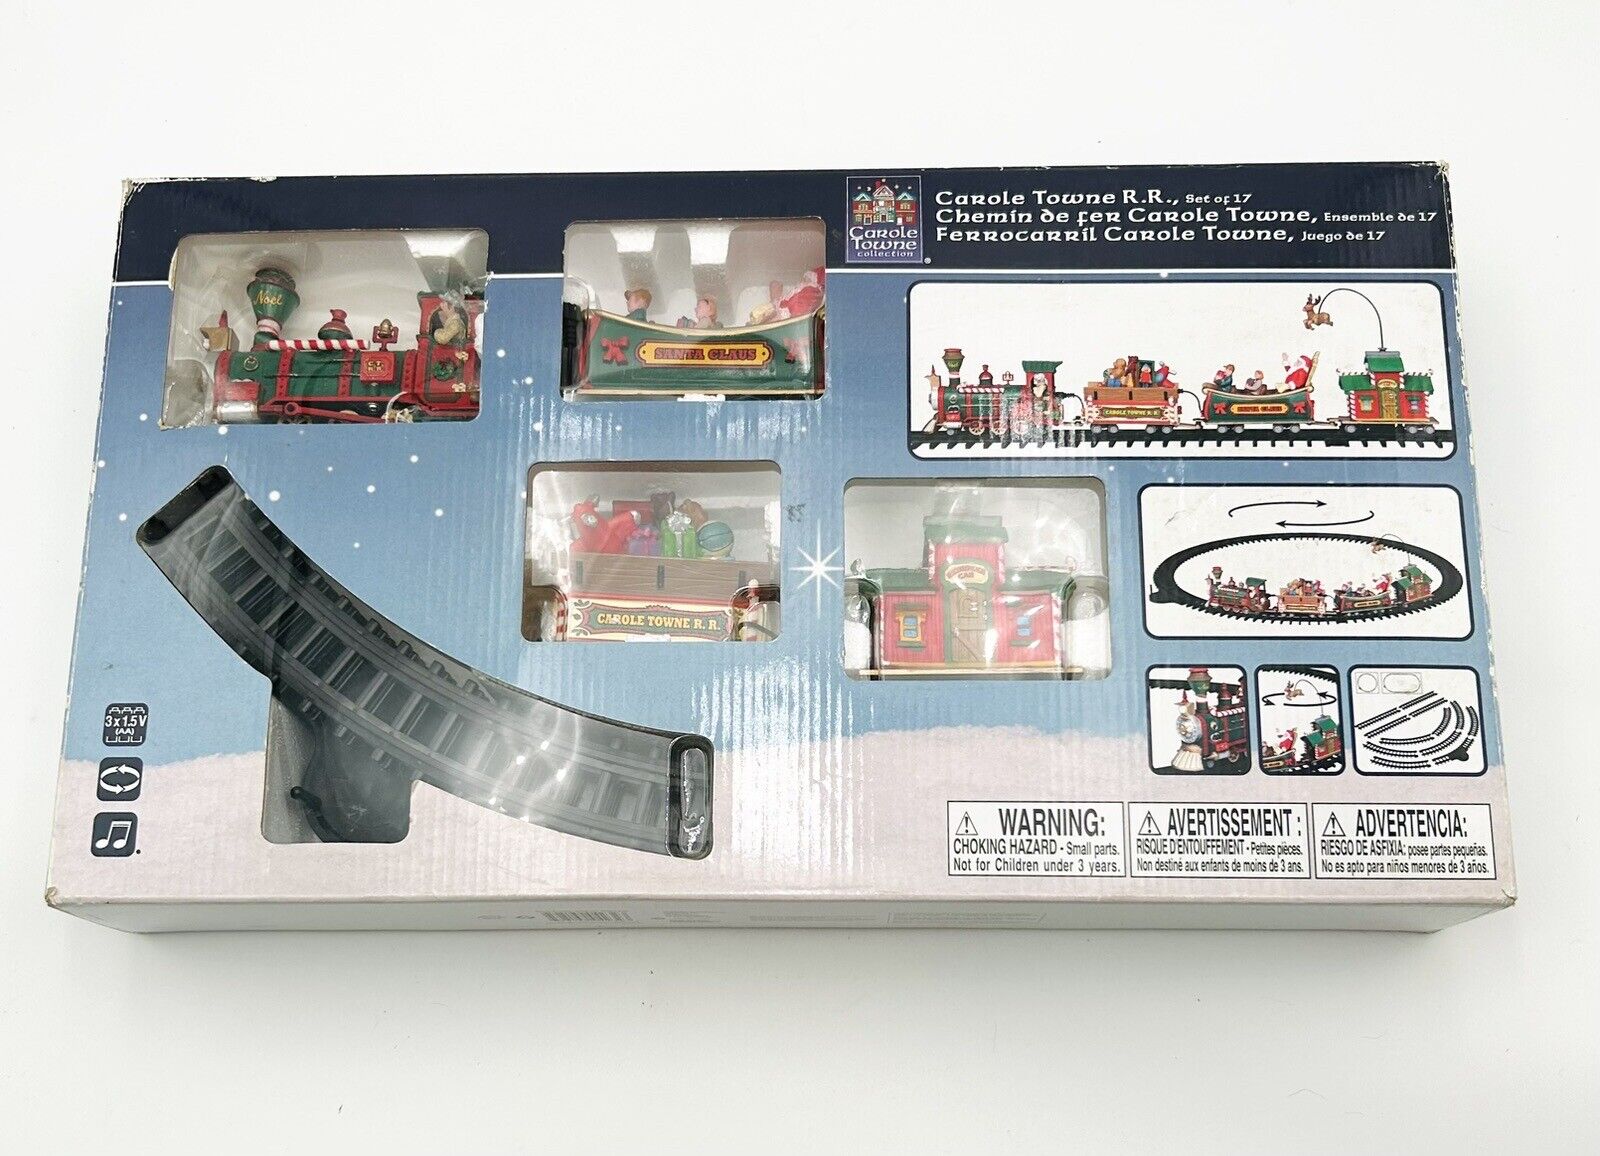 Lemax Carole Towne Train Rail Road Sights And Sound 2011 New In Box #04232